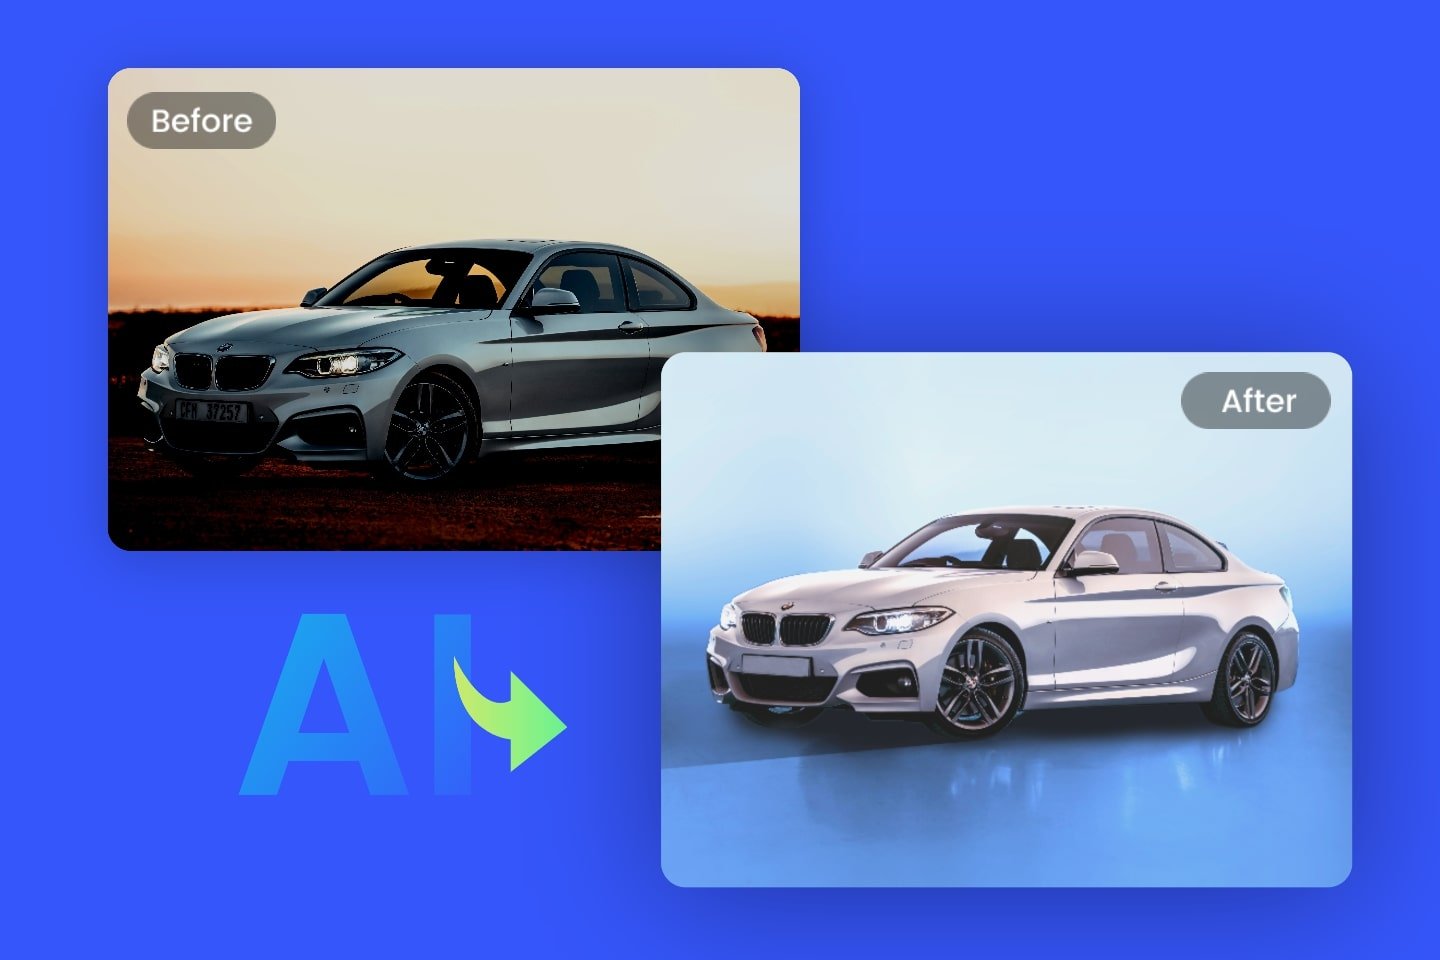 Enhance and edit car photos online effortlessly with Fotor's free AI car photo editor